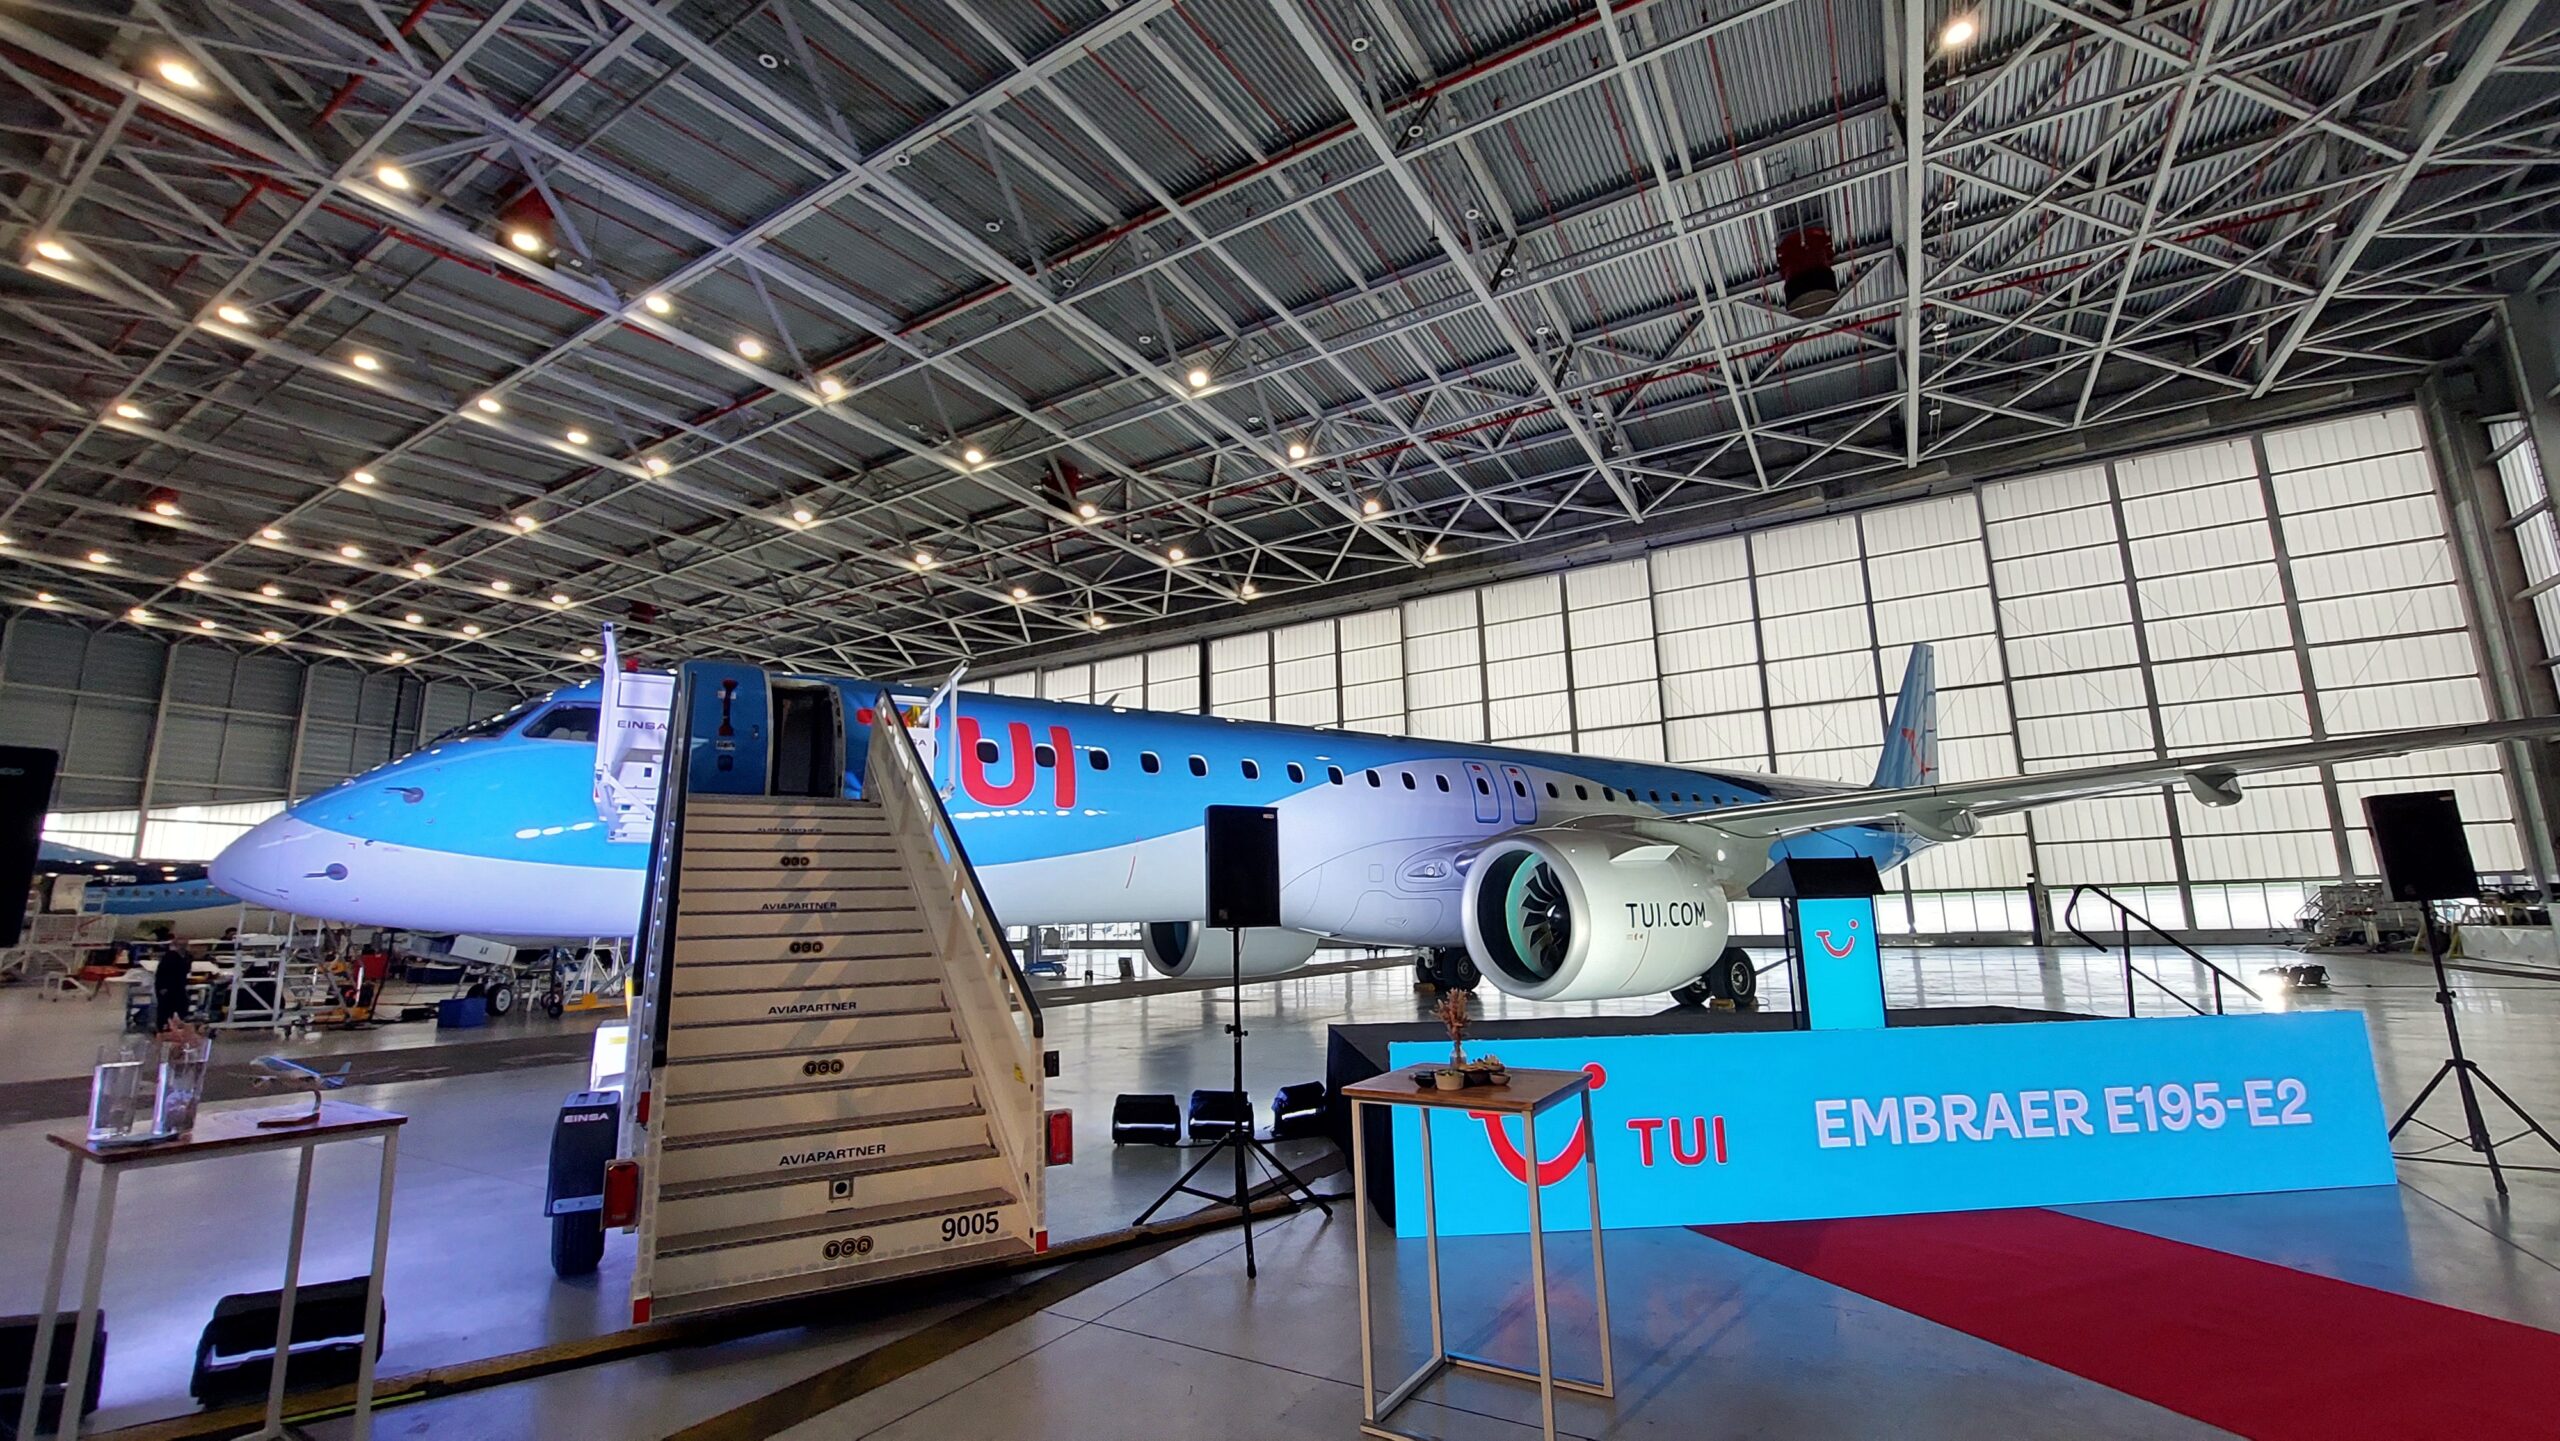 TUI fly Belgium named its second Embraer E195-E2 "Brussels" in a ceremony at Brussels Airport